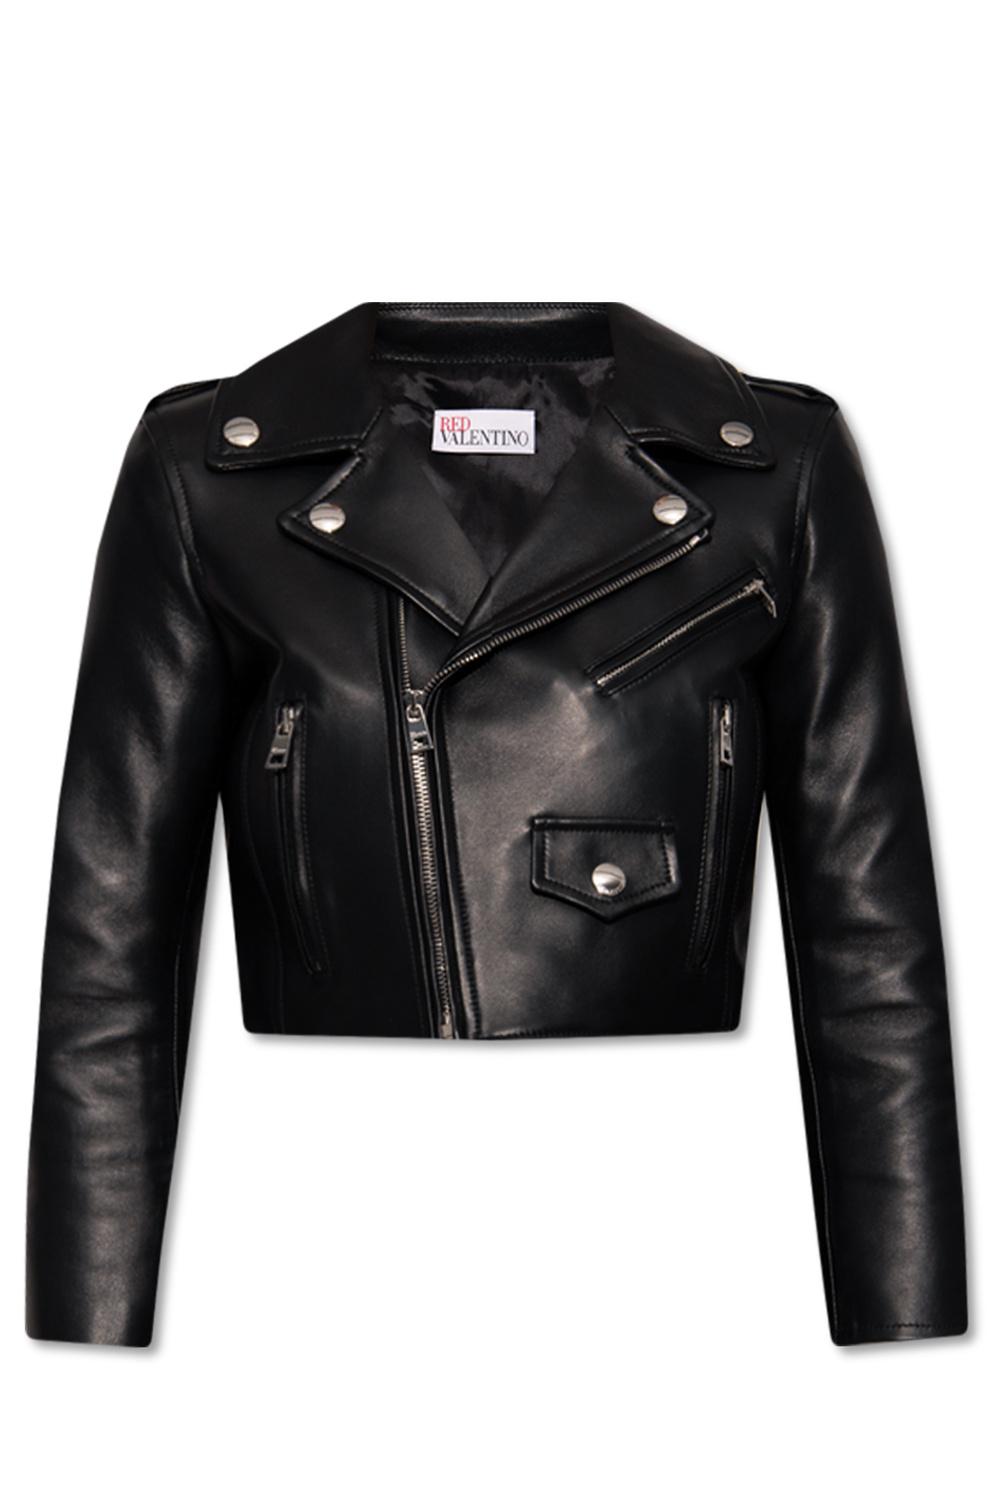 RED Valentino Leather Jacket in Black - Lyst